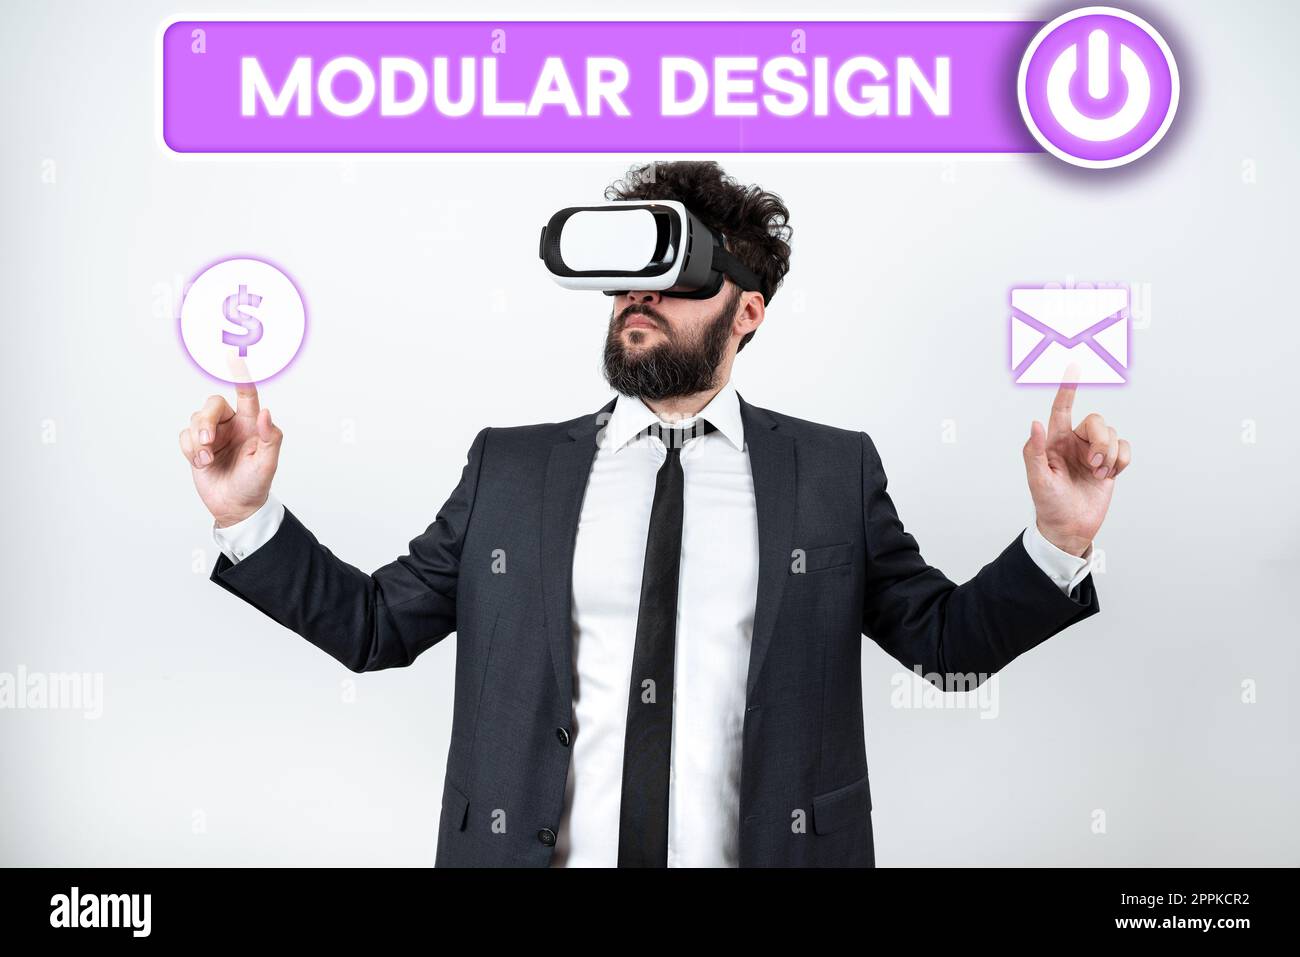 Text showing inspiration Modular Design. Business idea product designing to produce product by integrating or combining independent parts Stock Photo